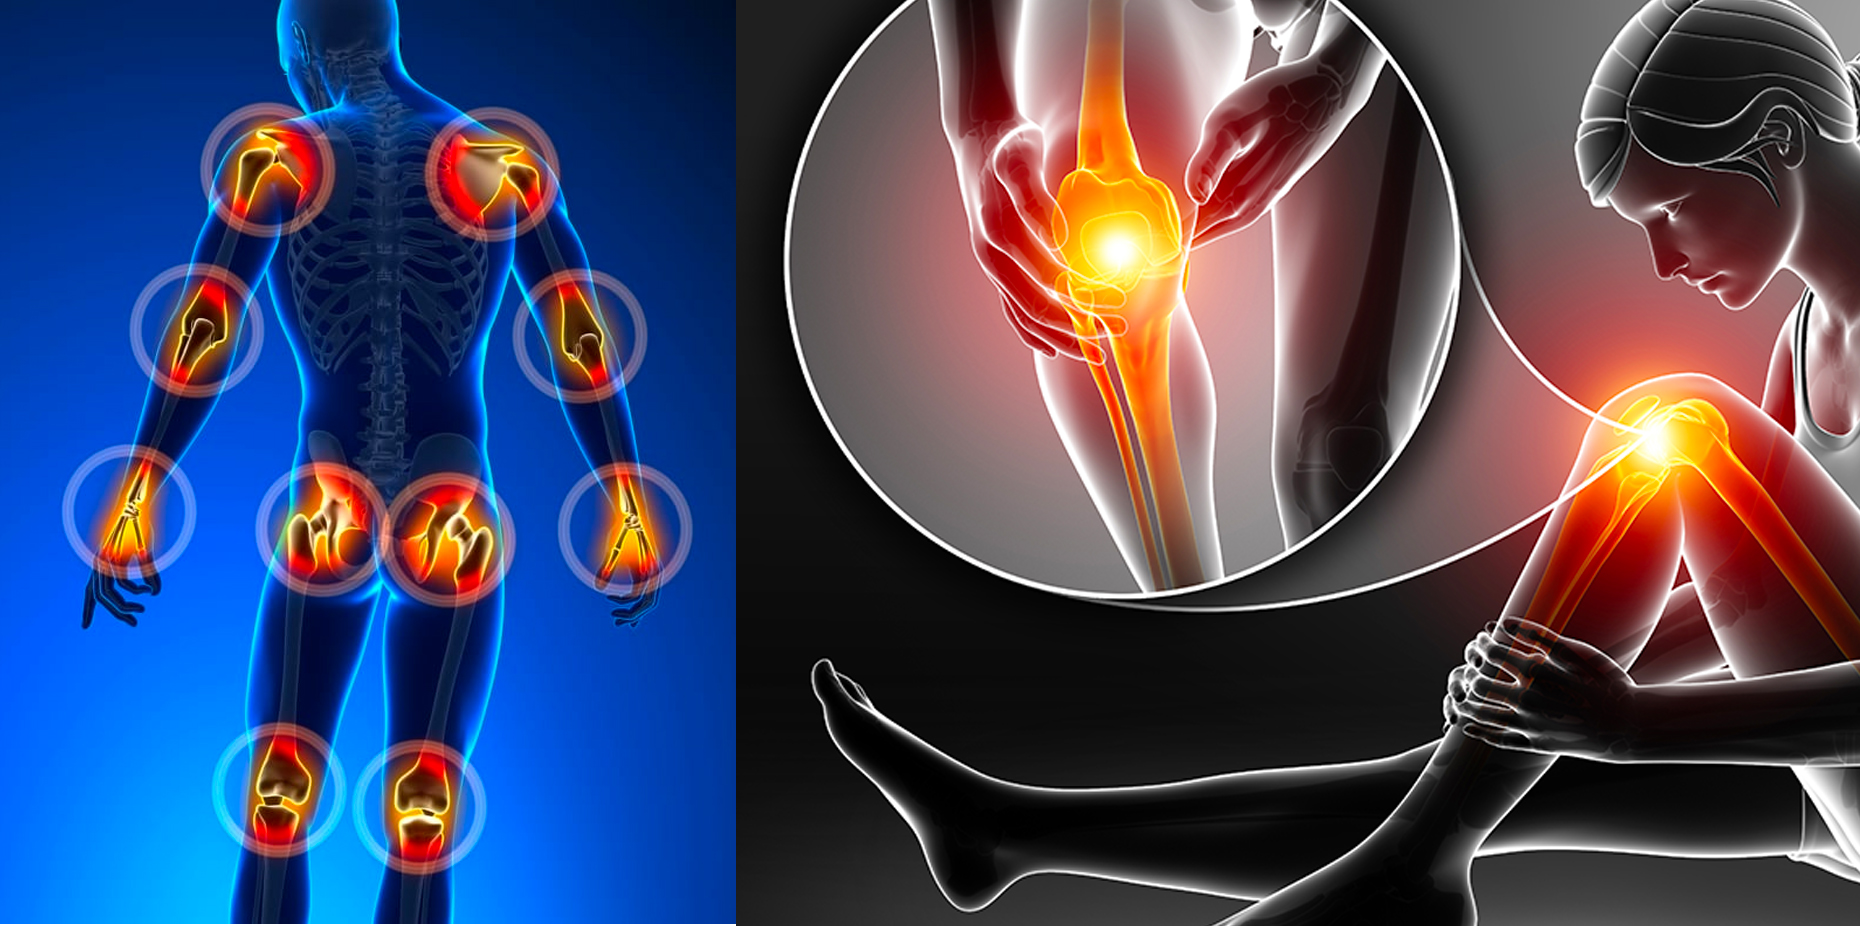 Arthritis: Types, Causes, Symptoms, Treatment, and More